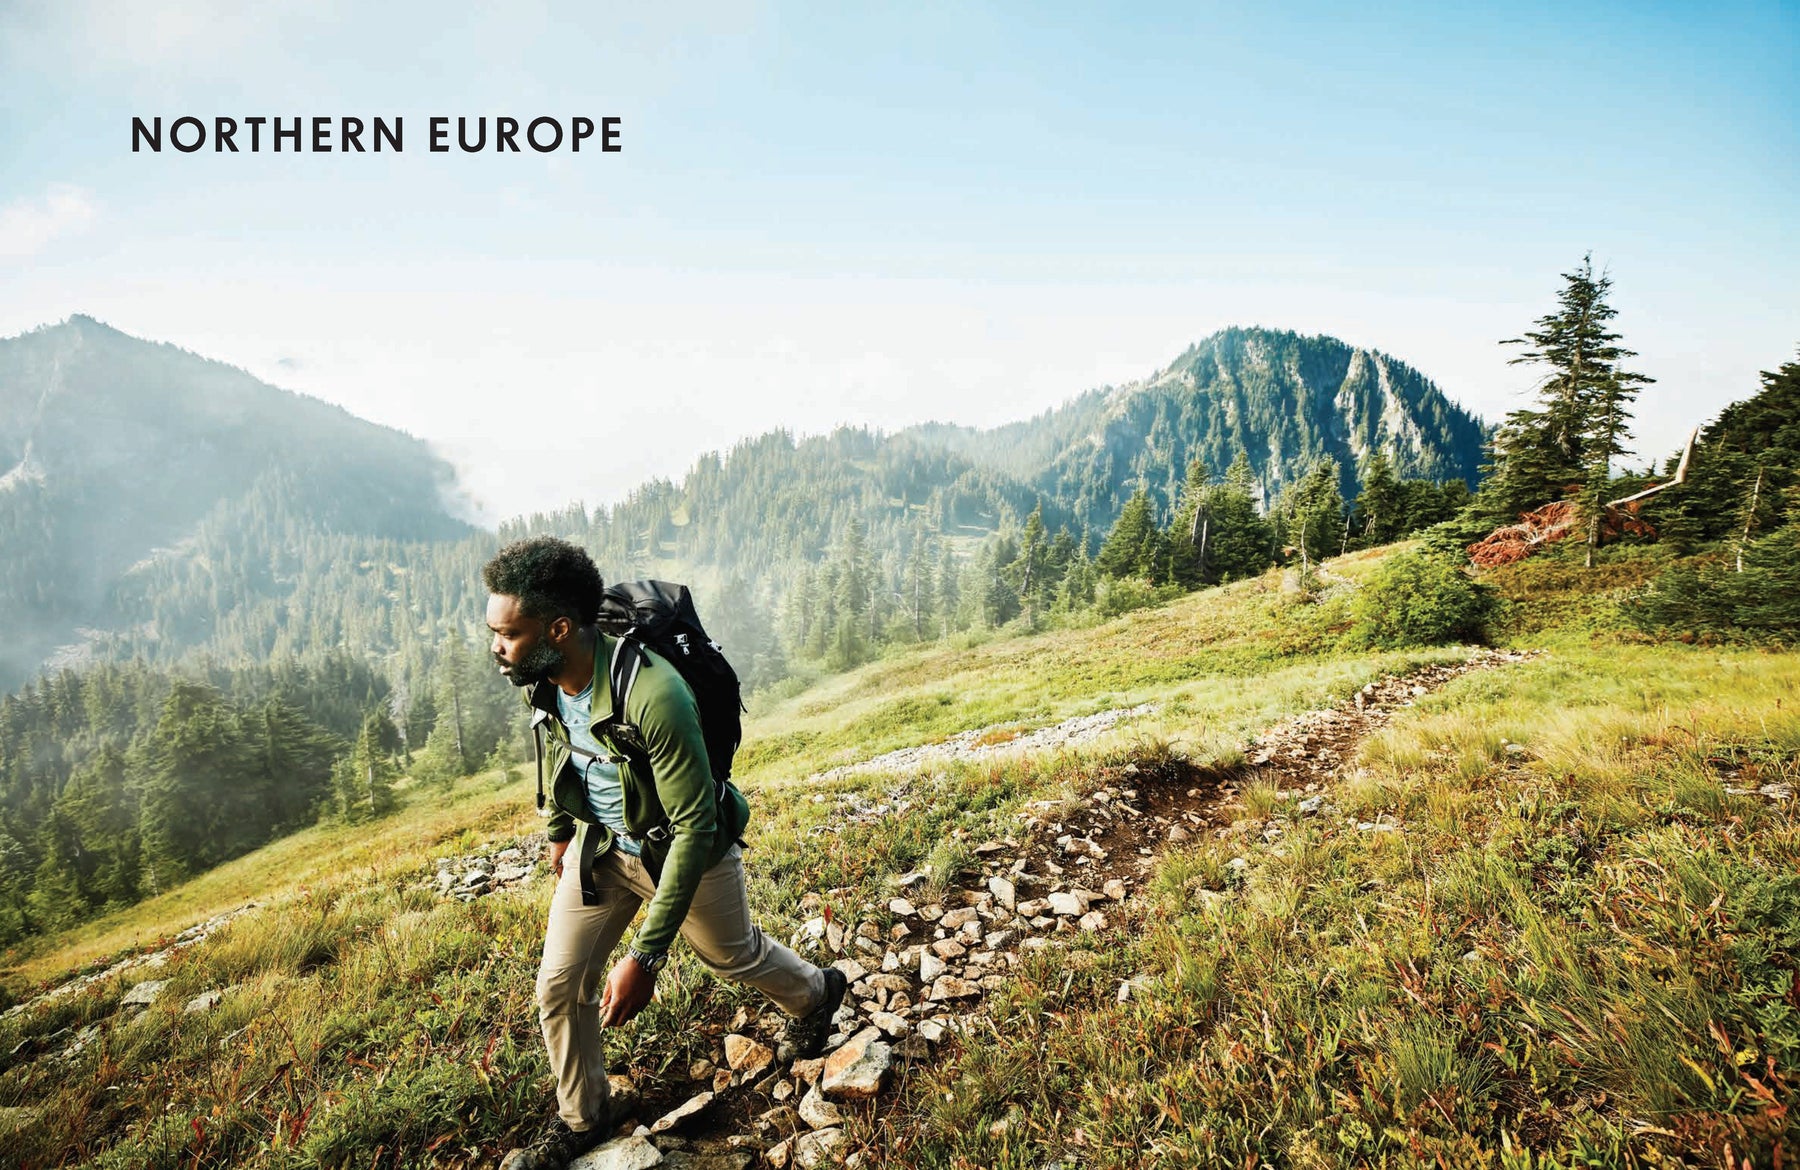 Epic Hikes of Europe - Book